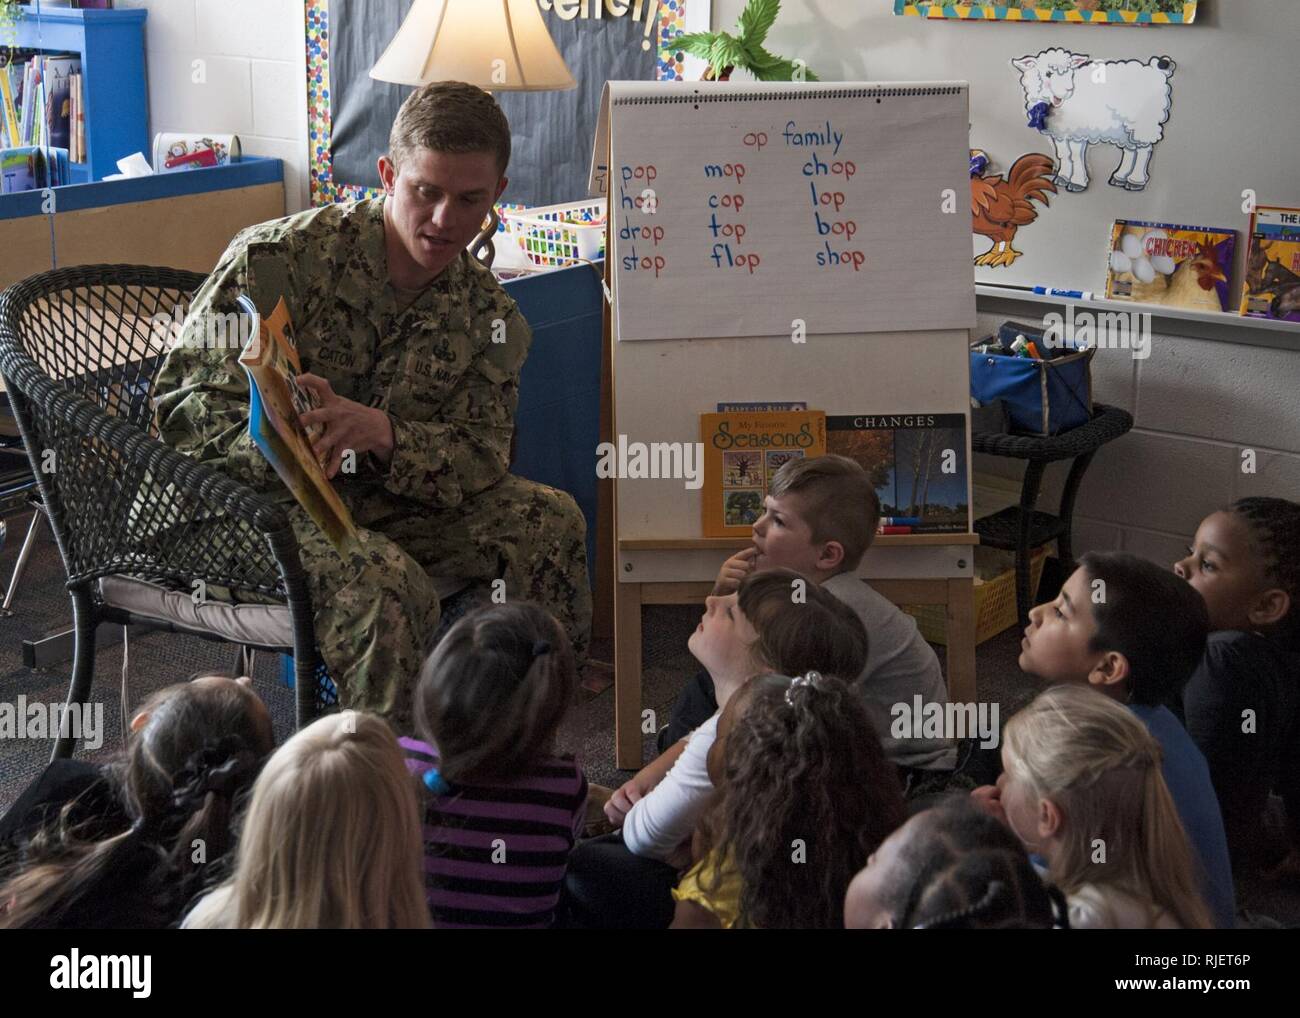 MOYOCK, N.C. (Feb. 25, 2013) Lt. Keith Caton, assigned to Explosive Ordnance Disposal Mobile Unit (EODMU) 2, reads a book during a visit to Central Elementary School. Sailors from EODMU 2 became pen pals with the students during a deployment as part of a community outreach program and agreed to visit the class upon their return to answer questions, read stories and demonstrate the PackBot transportable robotic system as well as attend a luncheon held in their honor. Stock Photo